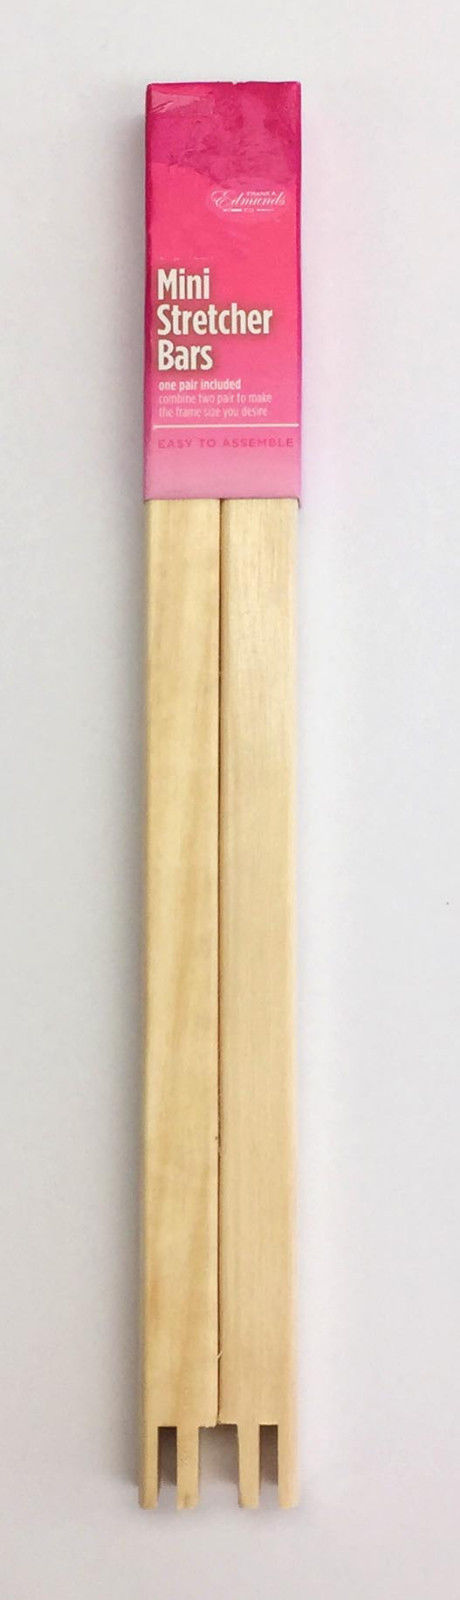 1 PAIR 15" Long Mini Wood Stretcher Bar Frame for Needlepoint, Quilting, Stitching